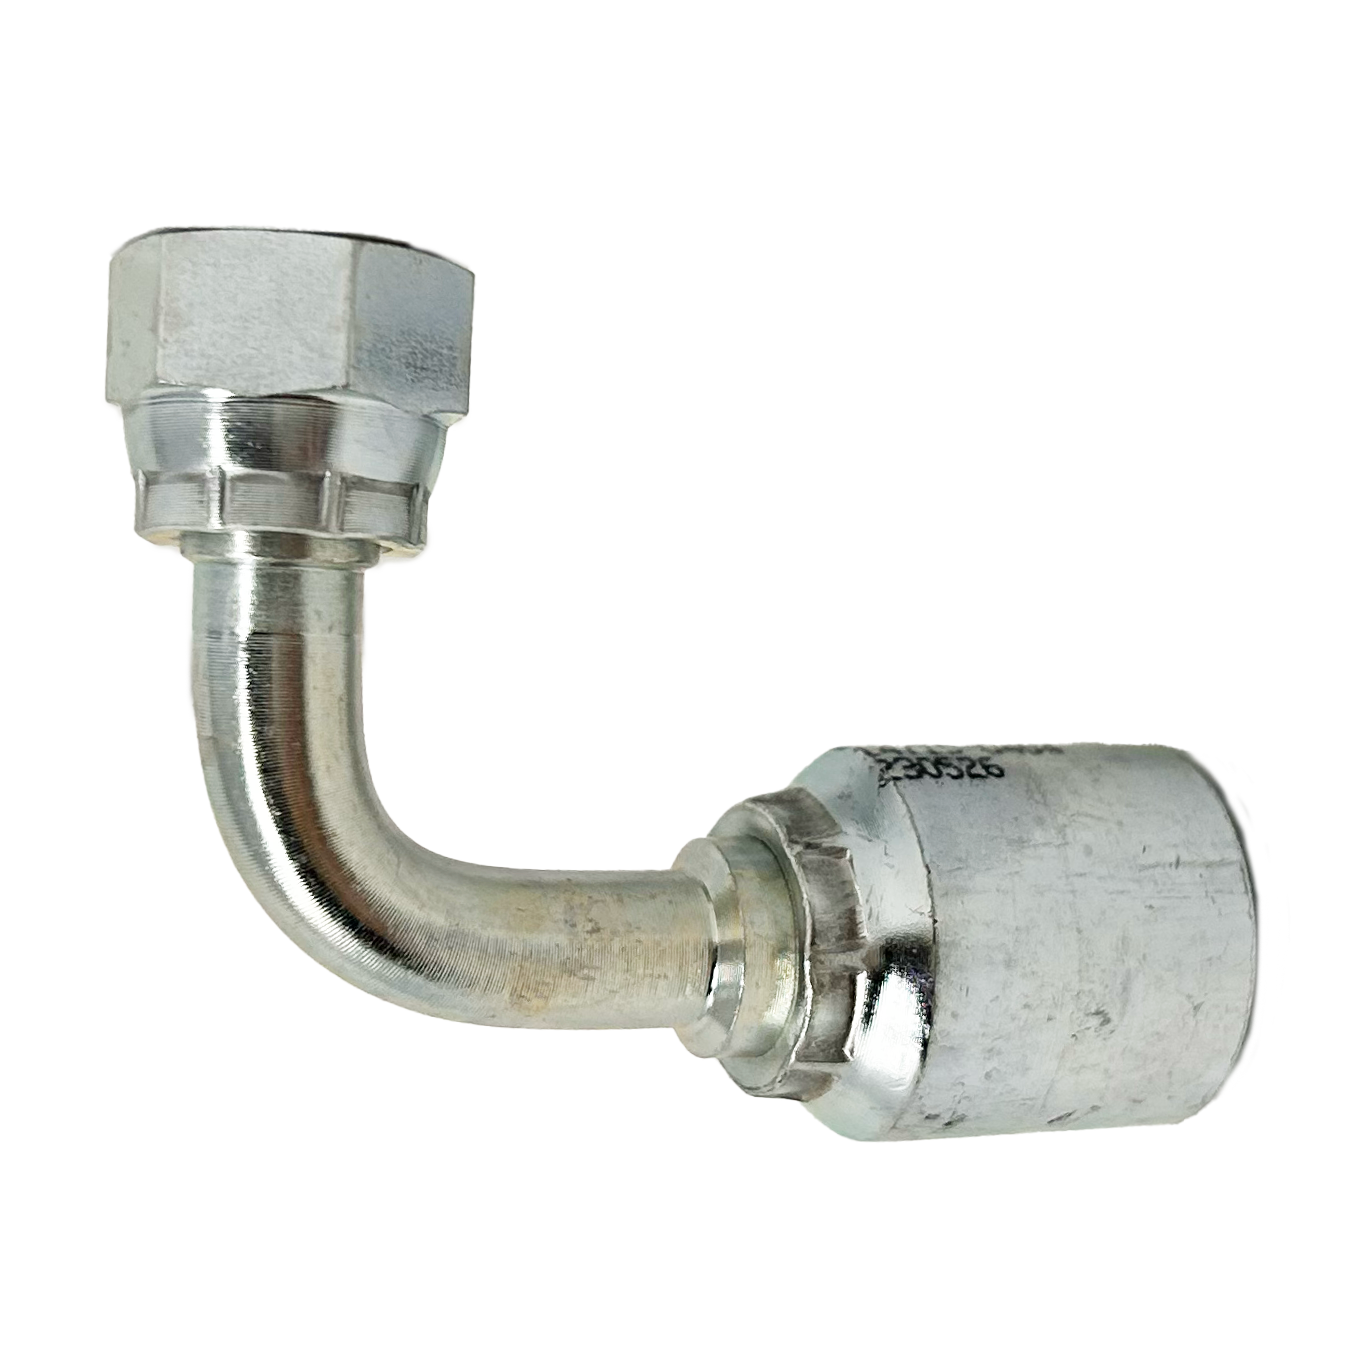 B2-OFFX90-0406: Continental Hose Fitting, 0.25 (1/4") Hose ID x 11/16-16 Female ORFS, 90-Degree Swivel Connection